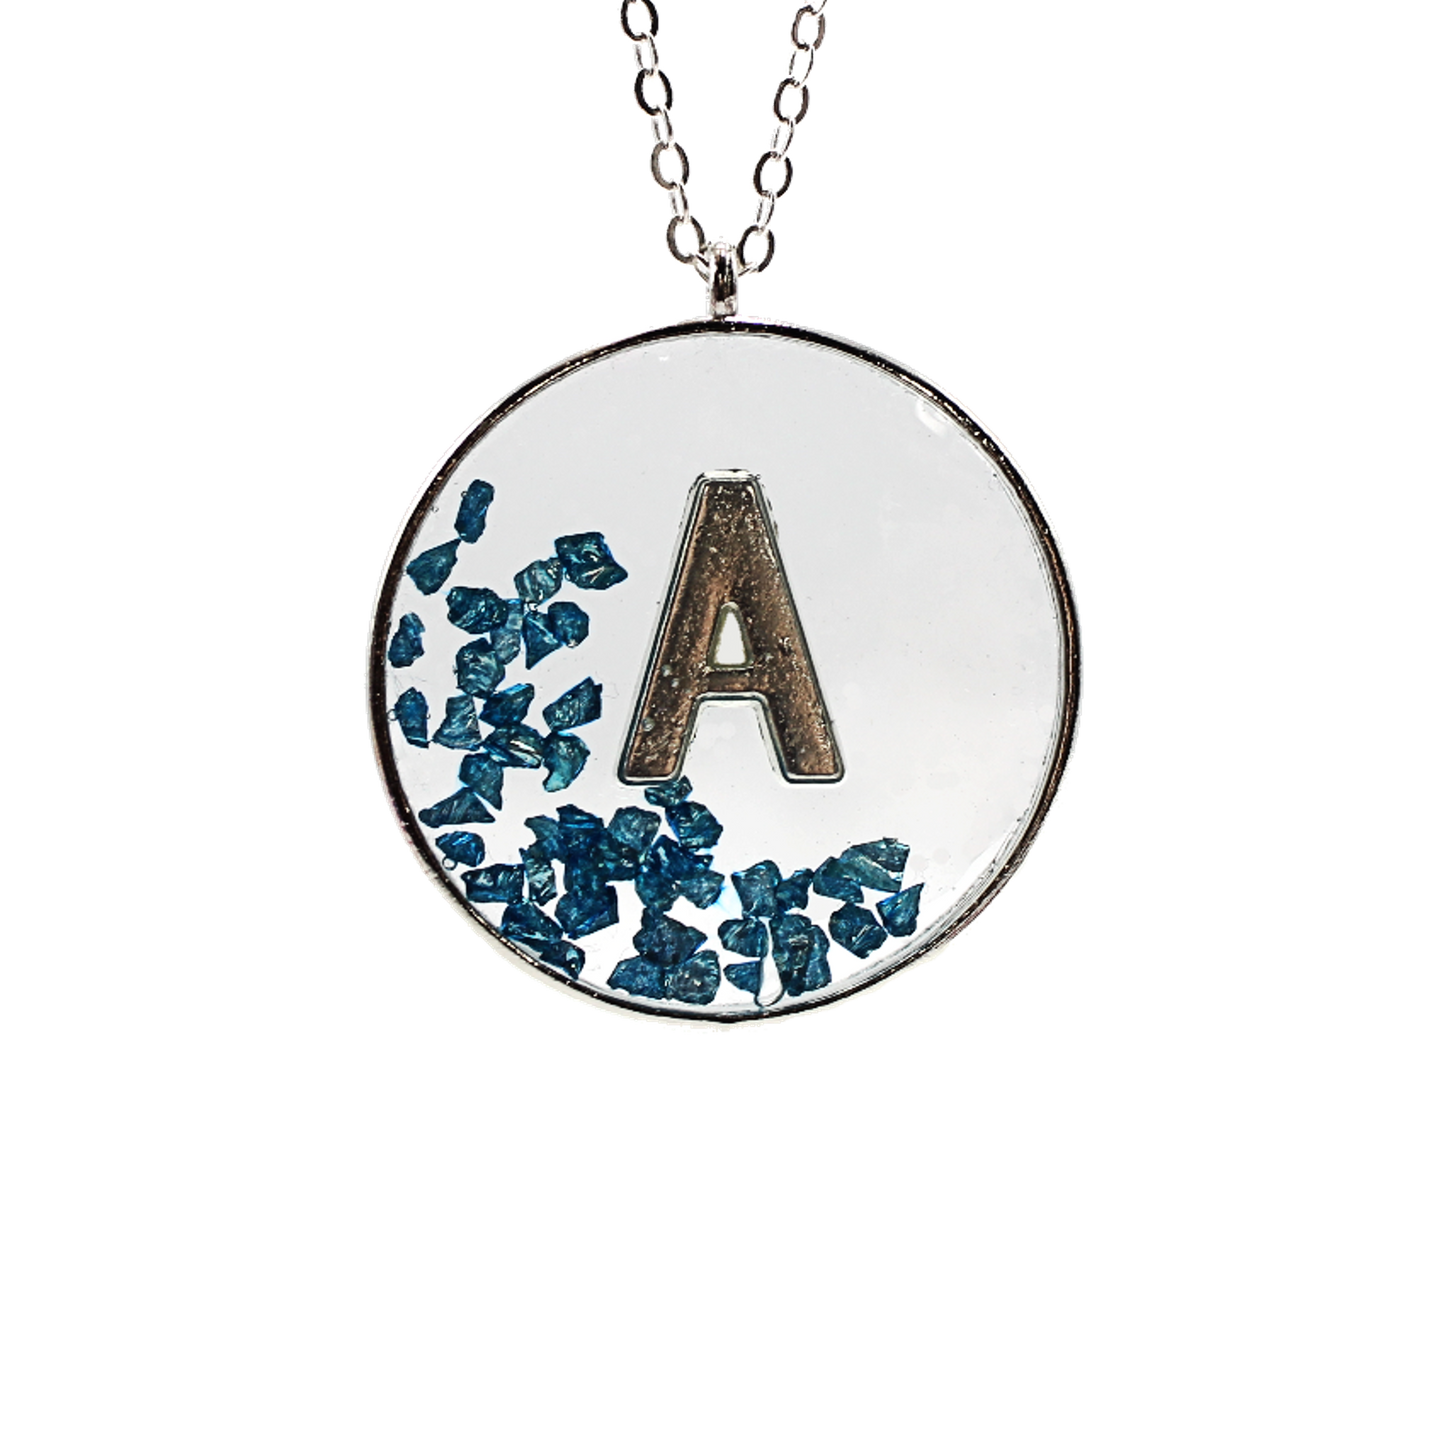 Crushed Glass Monogram Necklace